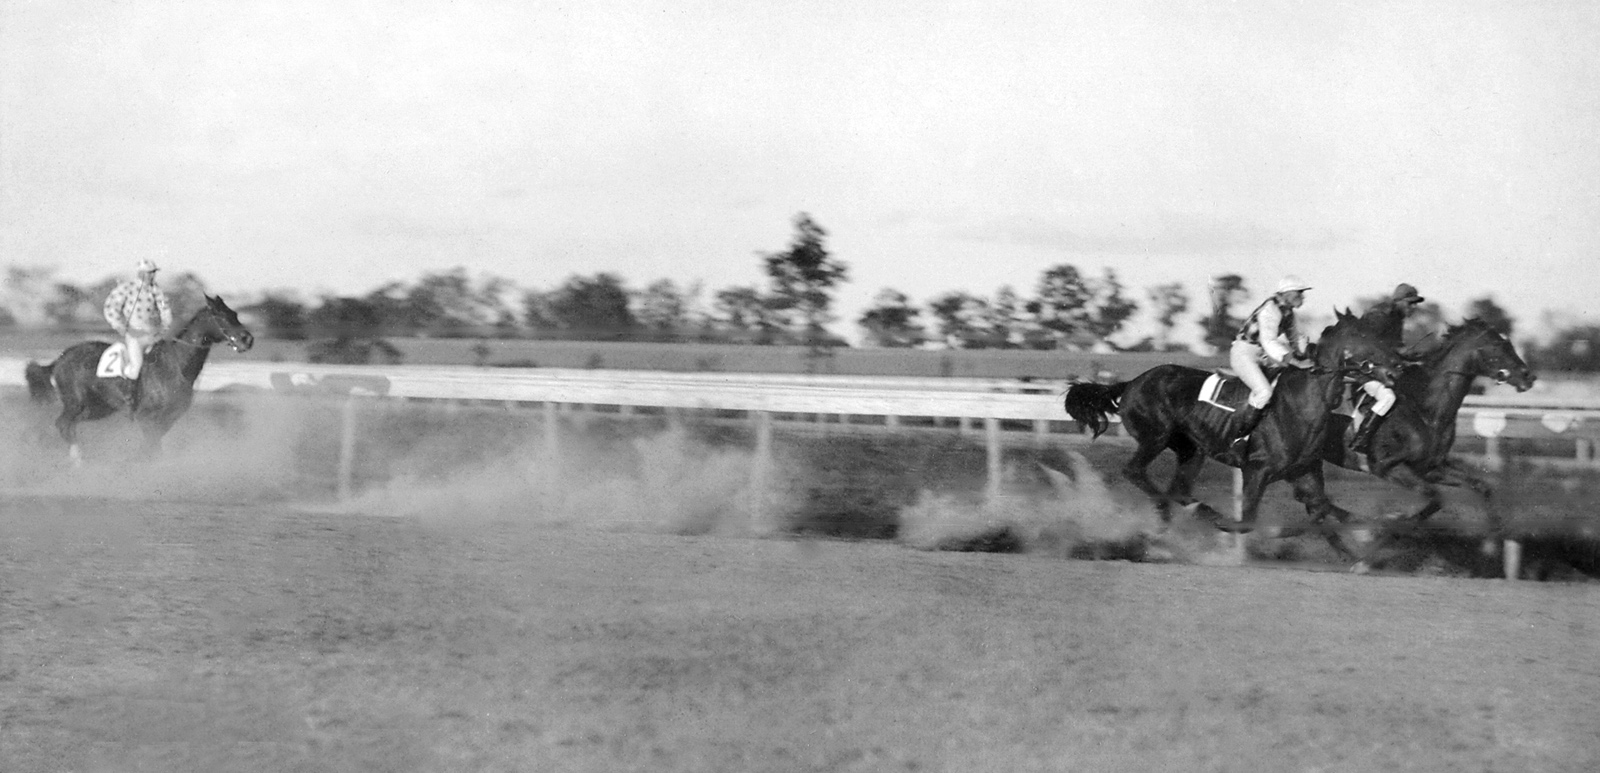 Henry of Navarre leading in his match race with Clifford (in 2nd) and Domino (in 3rd) at Morris Park on Oct. 6, 1894 (Keeneland Library Hemment Collection)